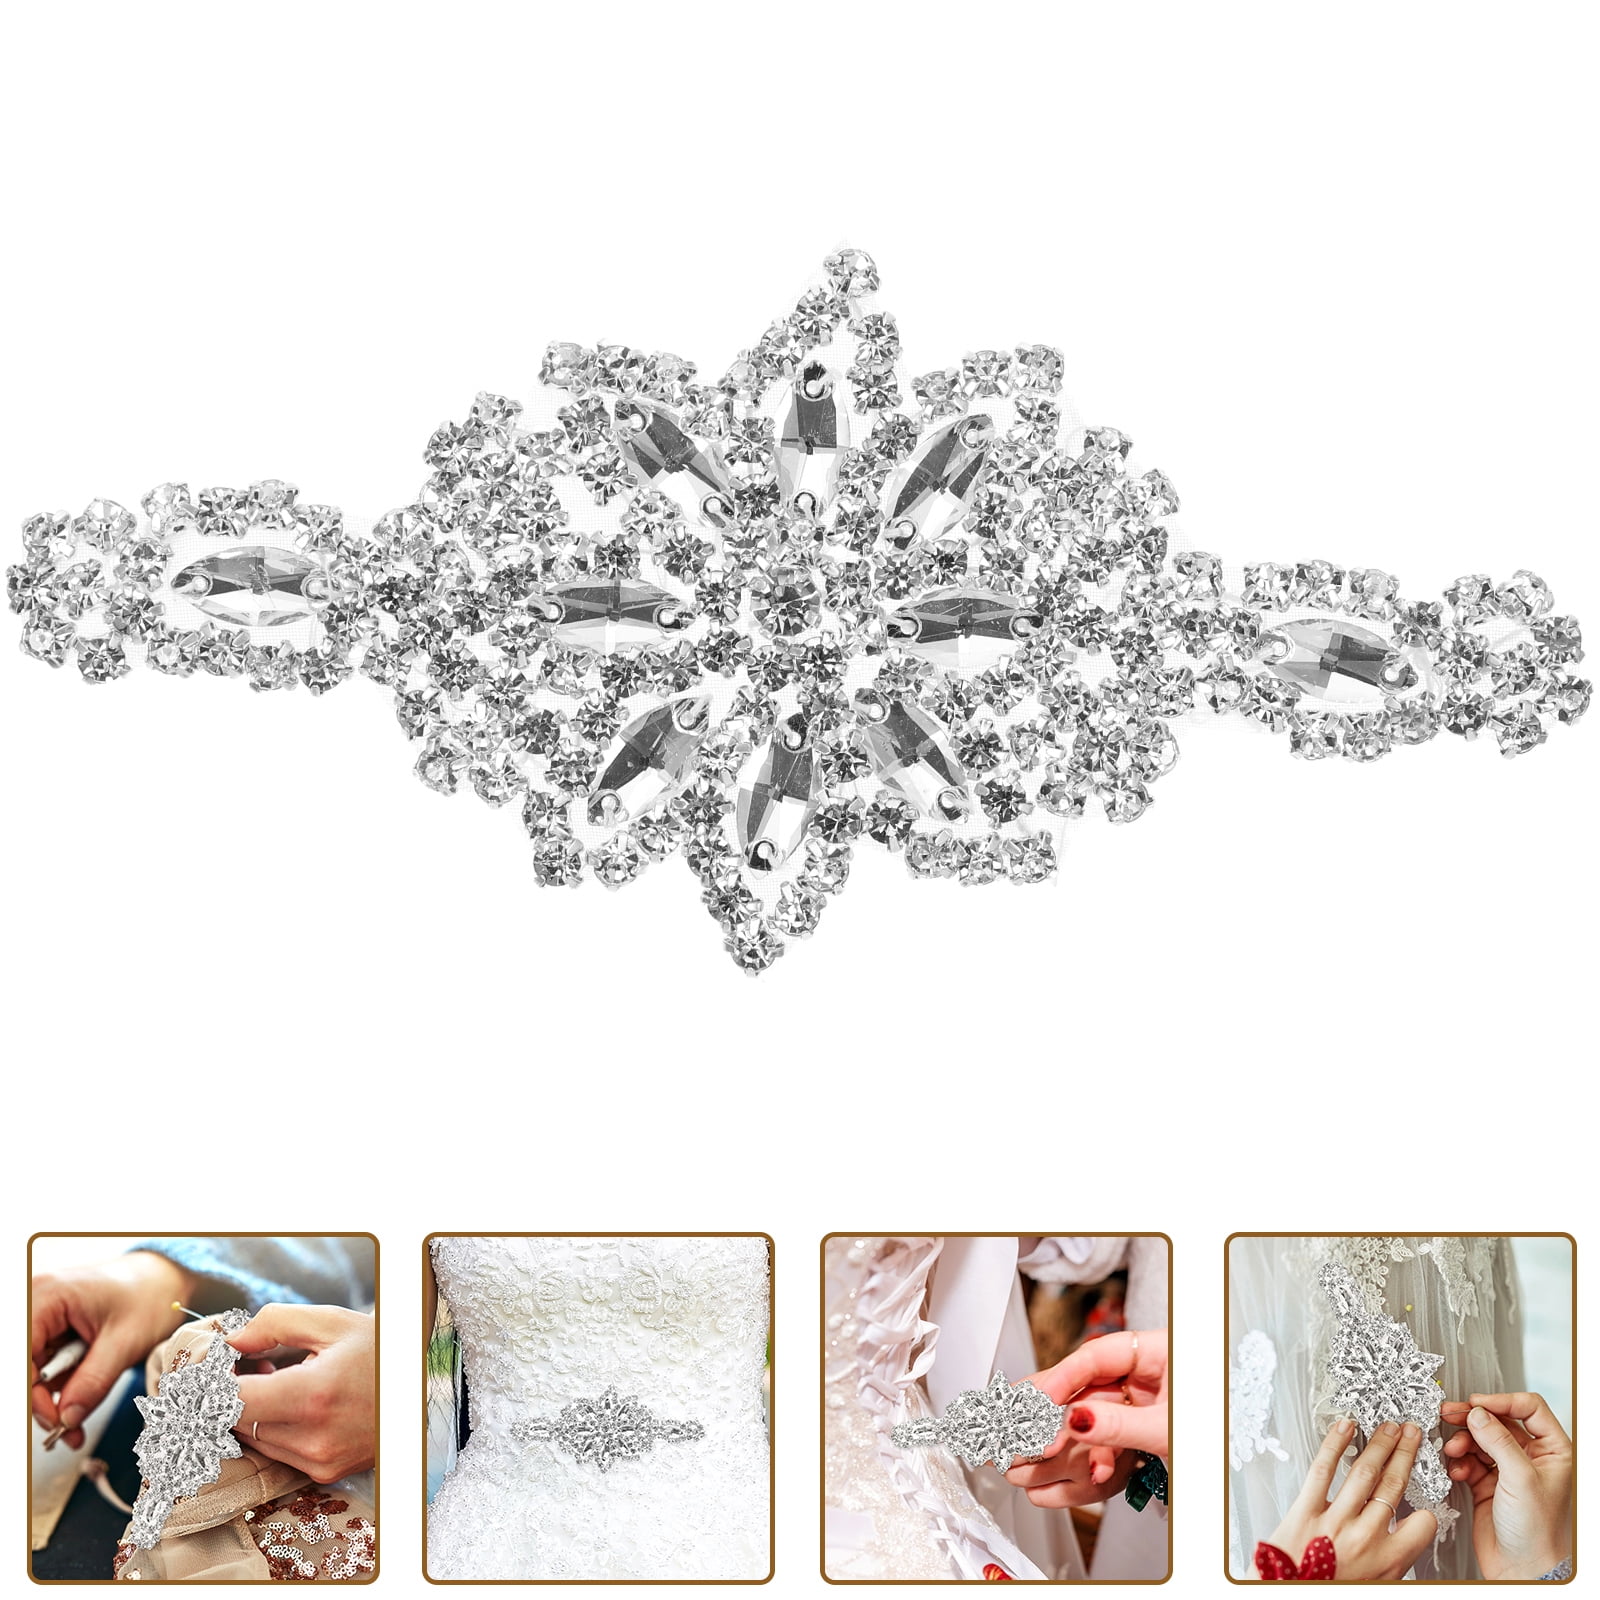  Lurrose 2pcs Rhinestone Applique Jewels for Clothing Heat and  Bond Lite for Applique Rhinestone Letters Iron on Appliques Embellishments  DIY Back Patches Back Sticker Wedding Dress Bride : Everything Else